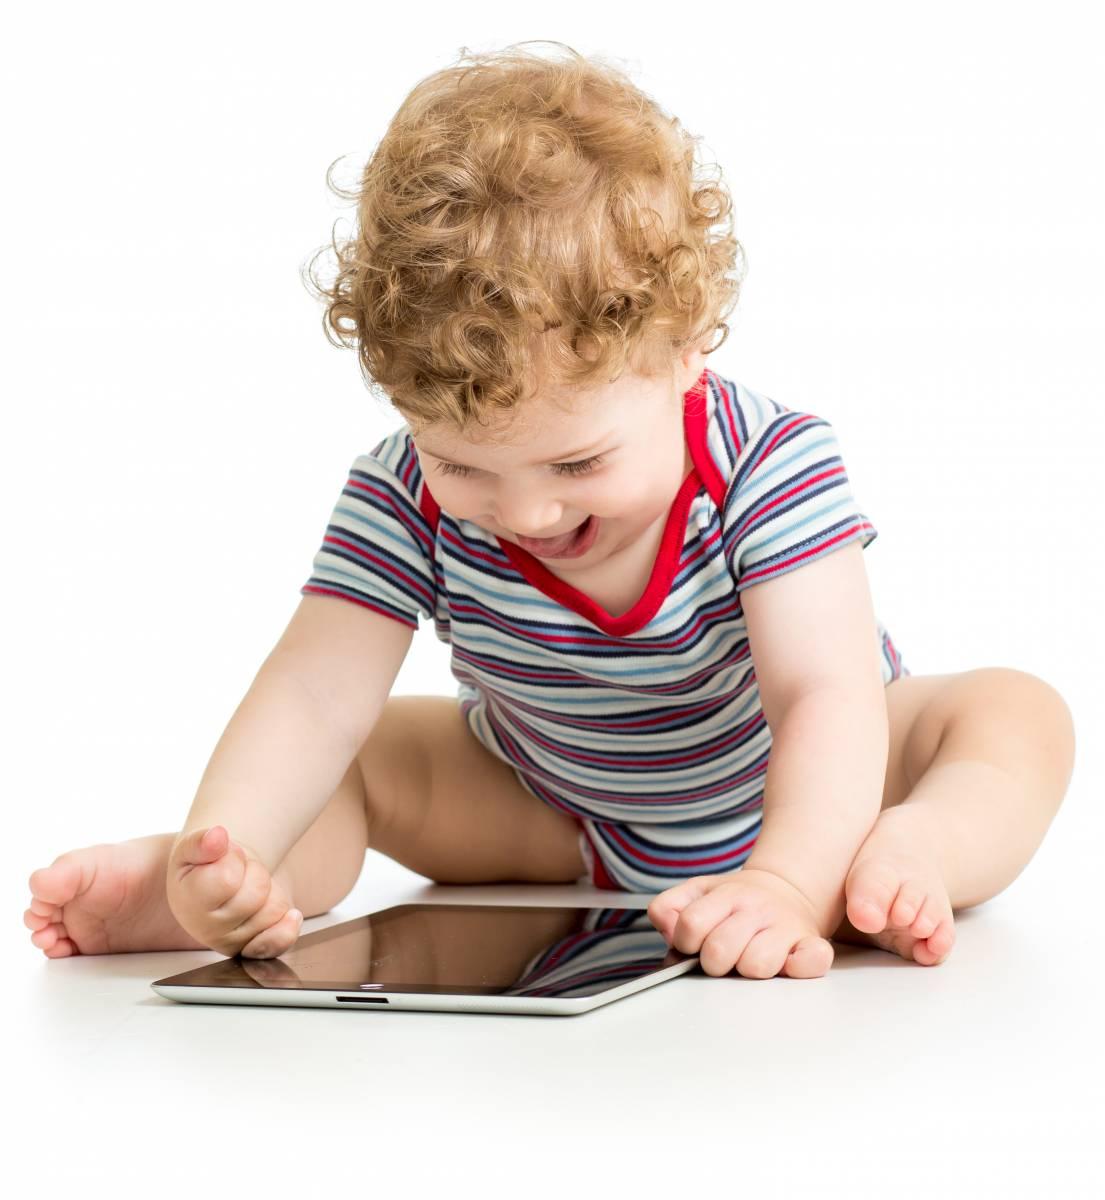 Toddler interacting with a tablet device